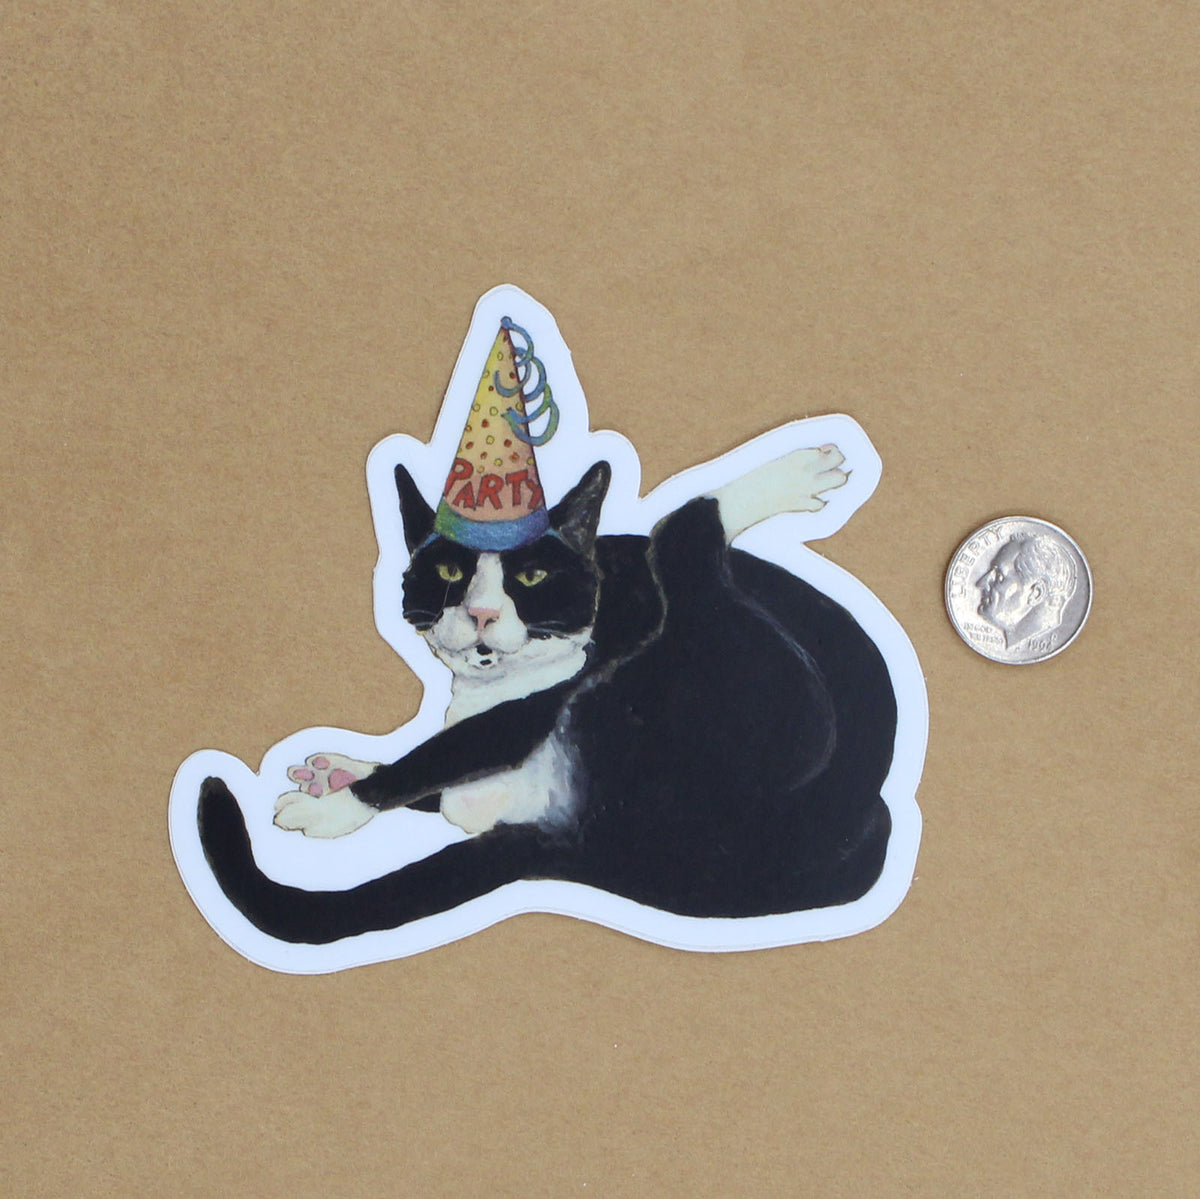 Party Cat - Sticker